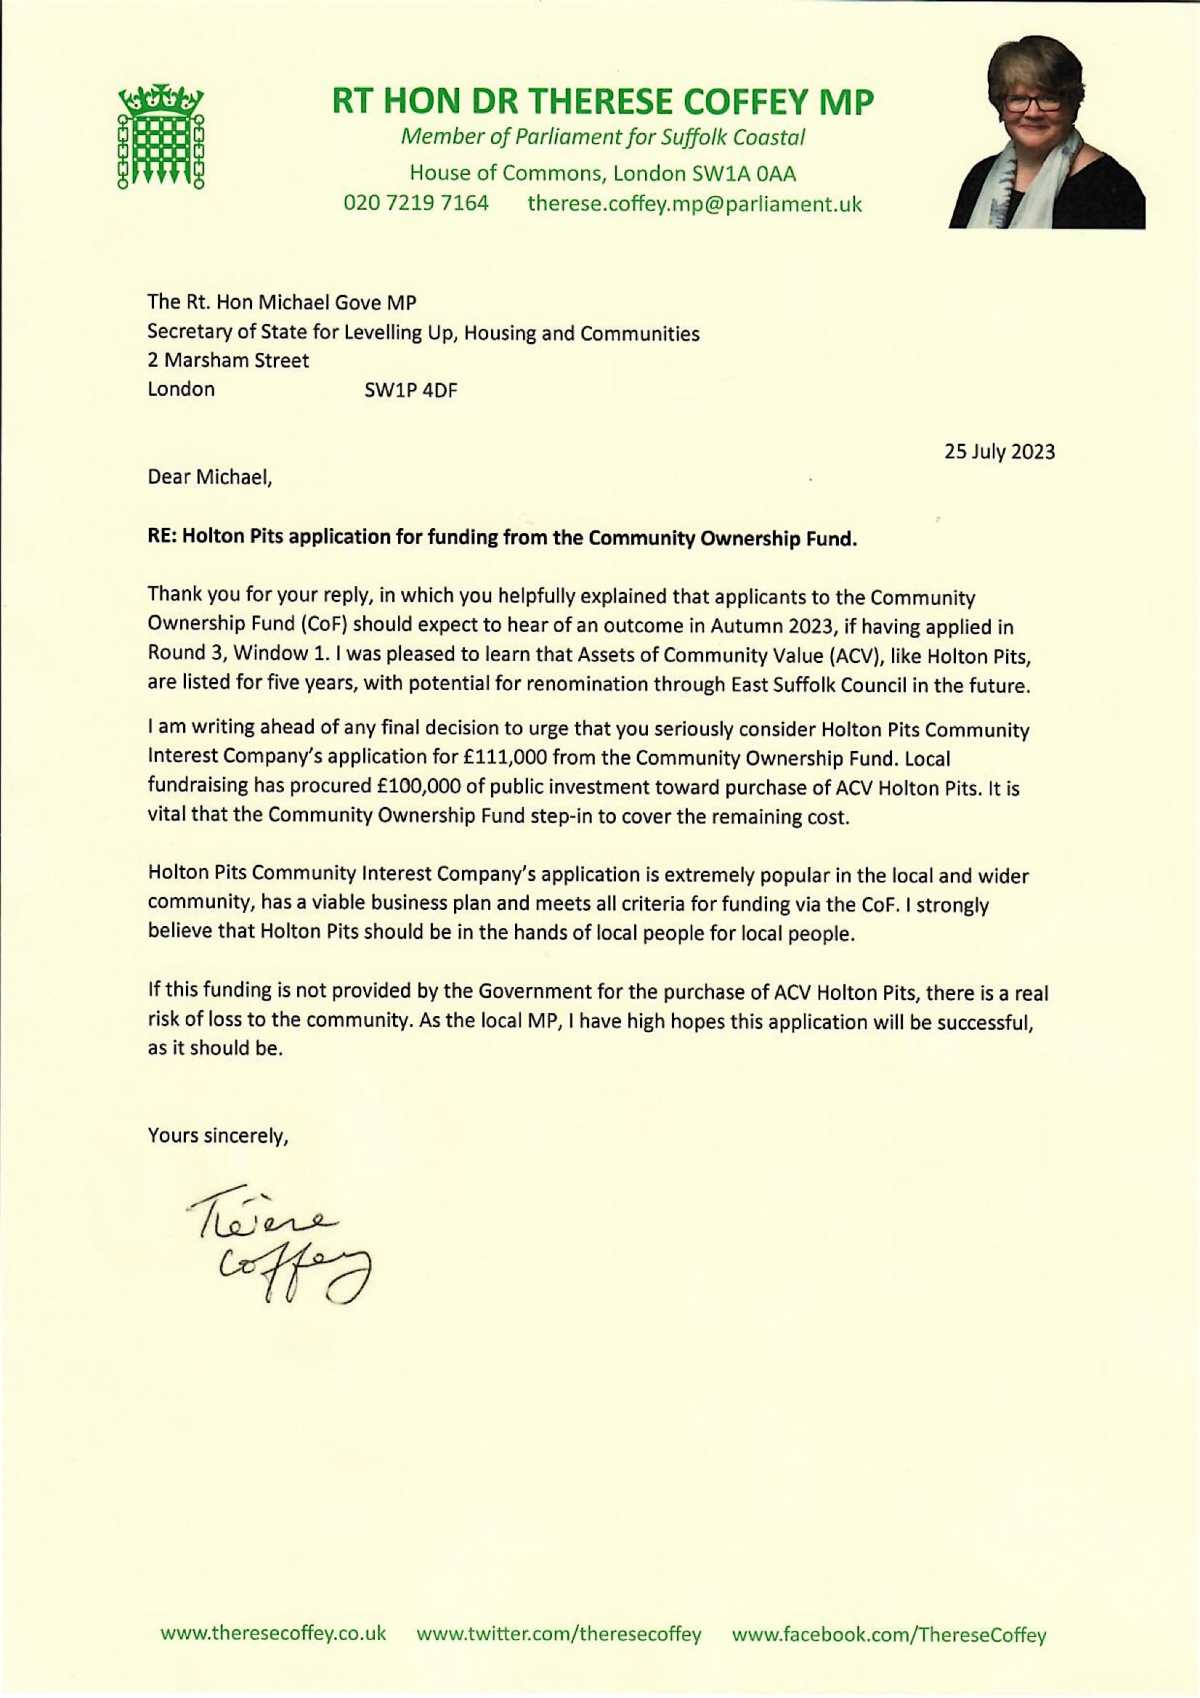 Thérèse Coffey MP – Letter of support